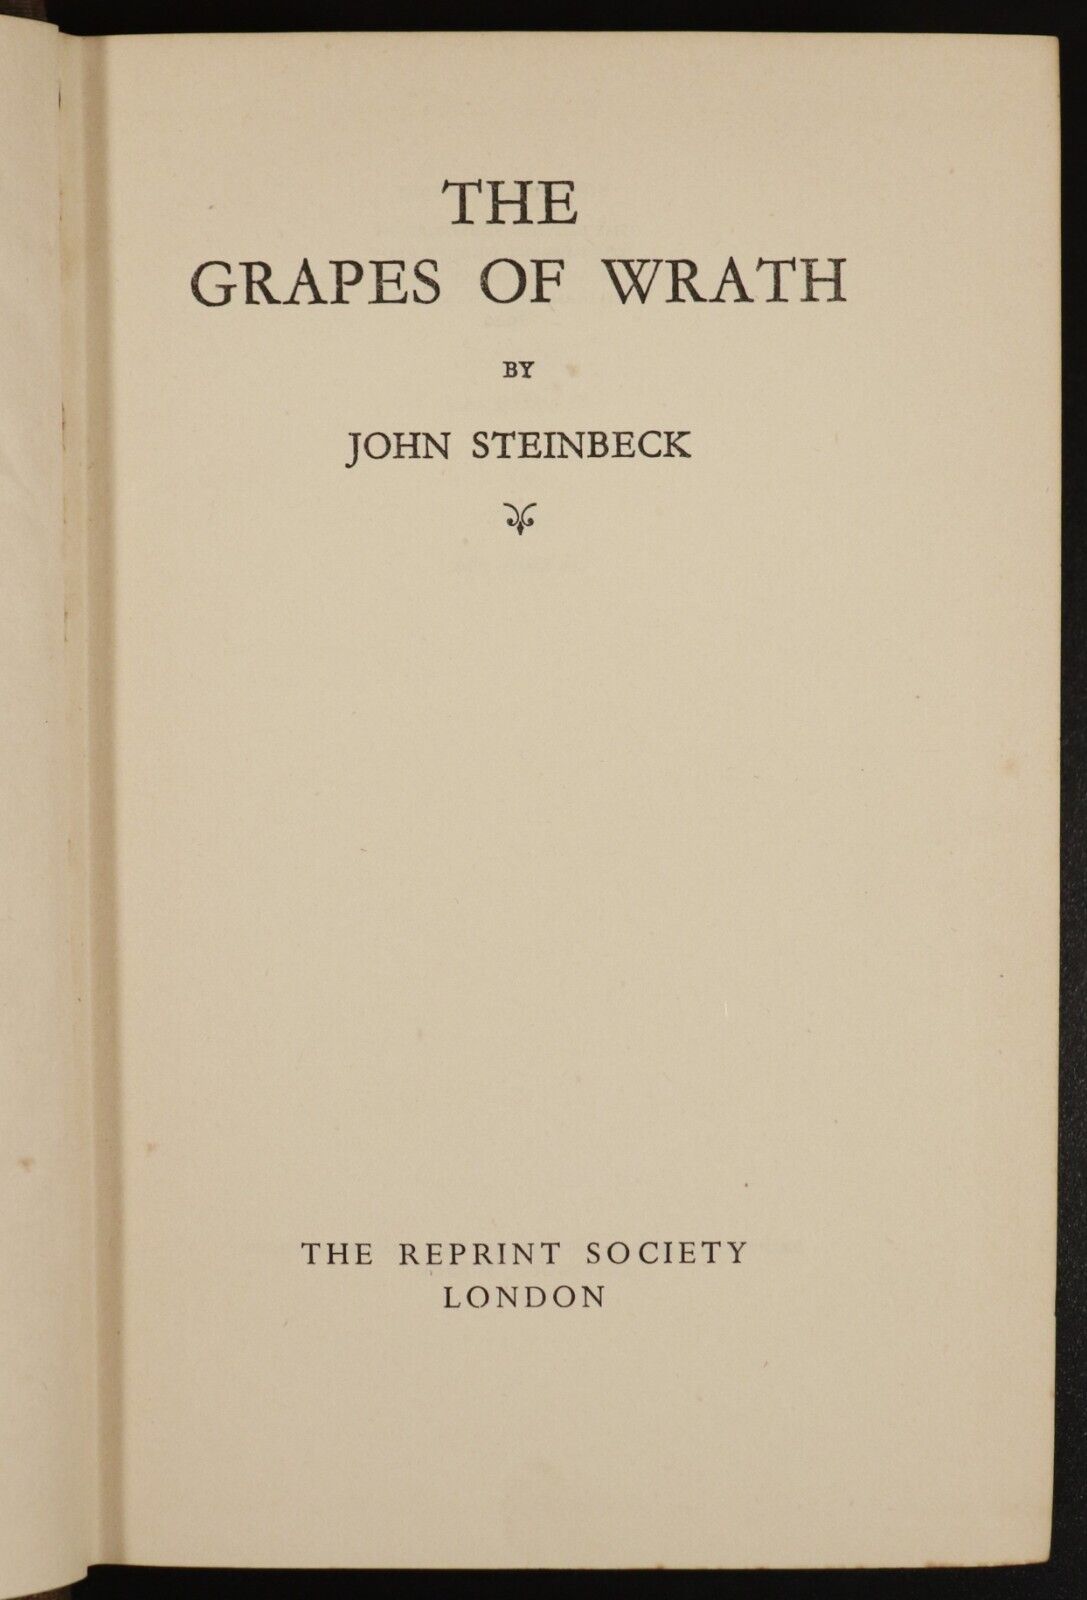 1940 The Grapes Of Wrath by John Steinbeck - Antique American Fiction Book - 0